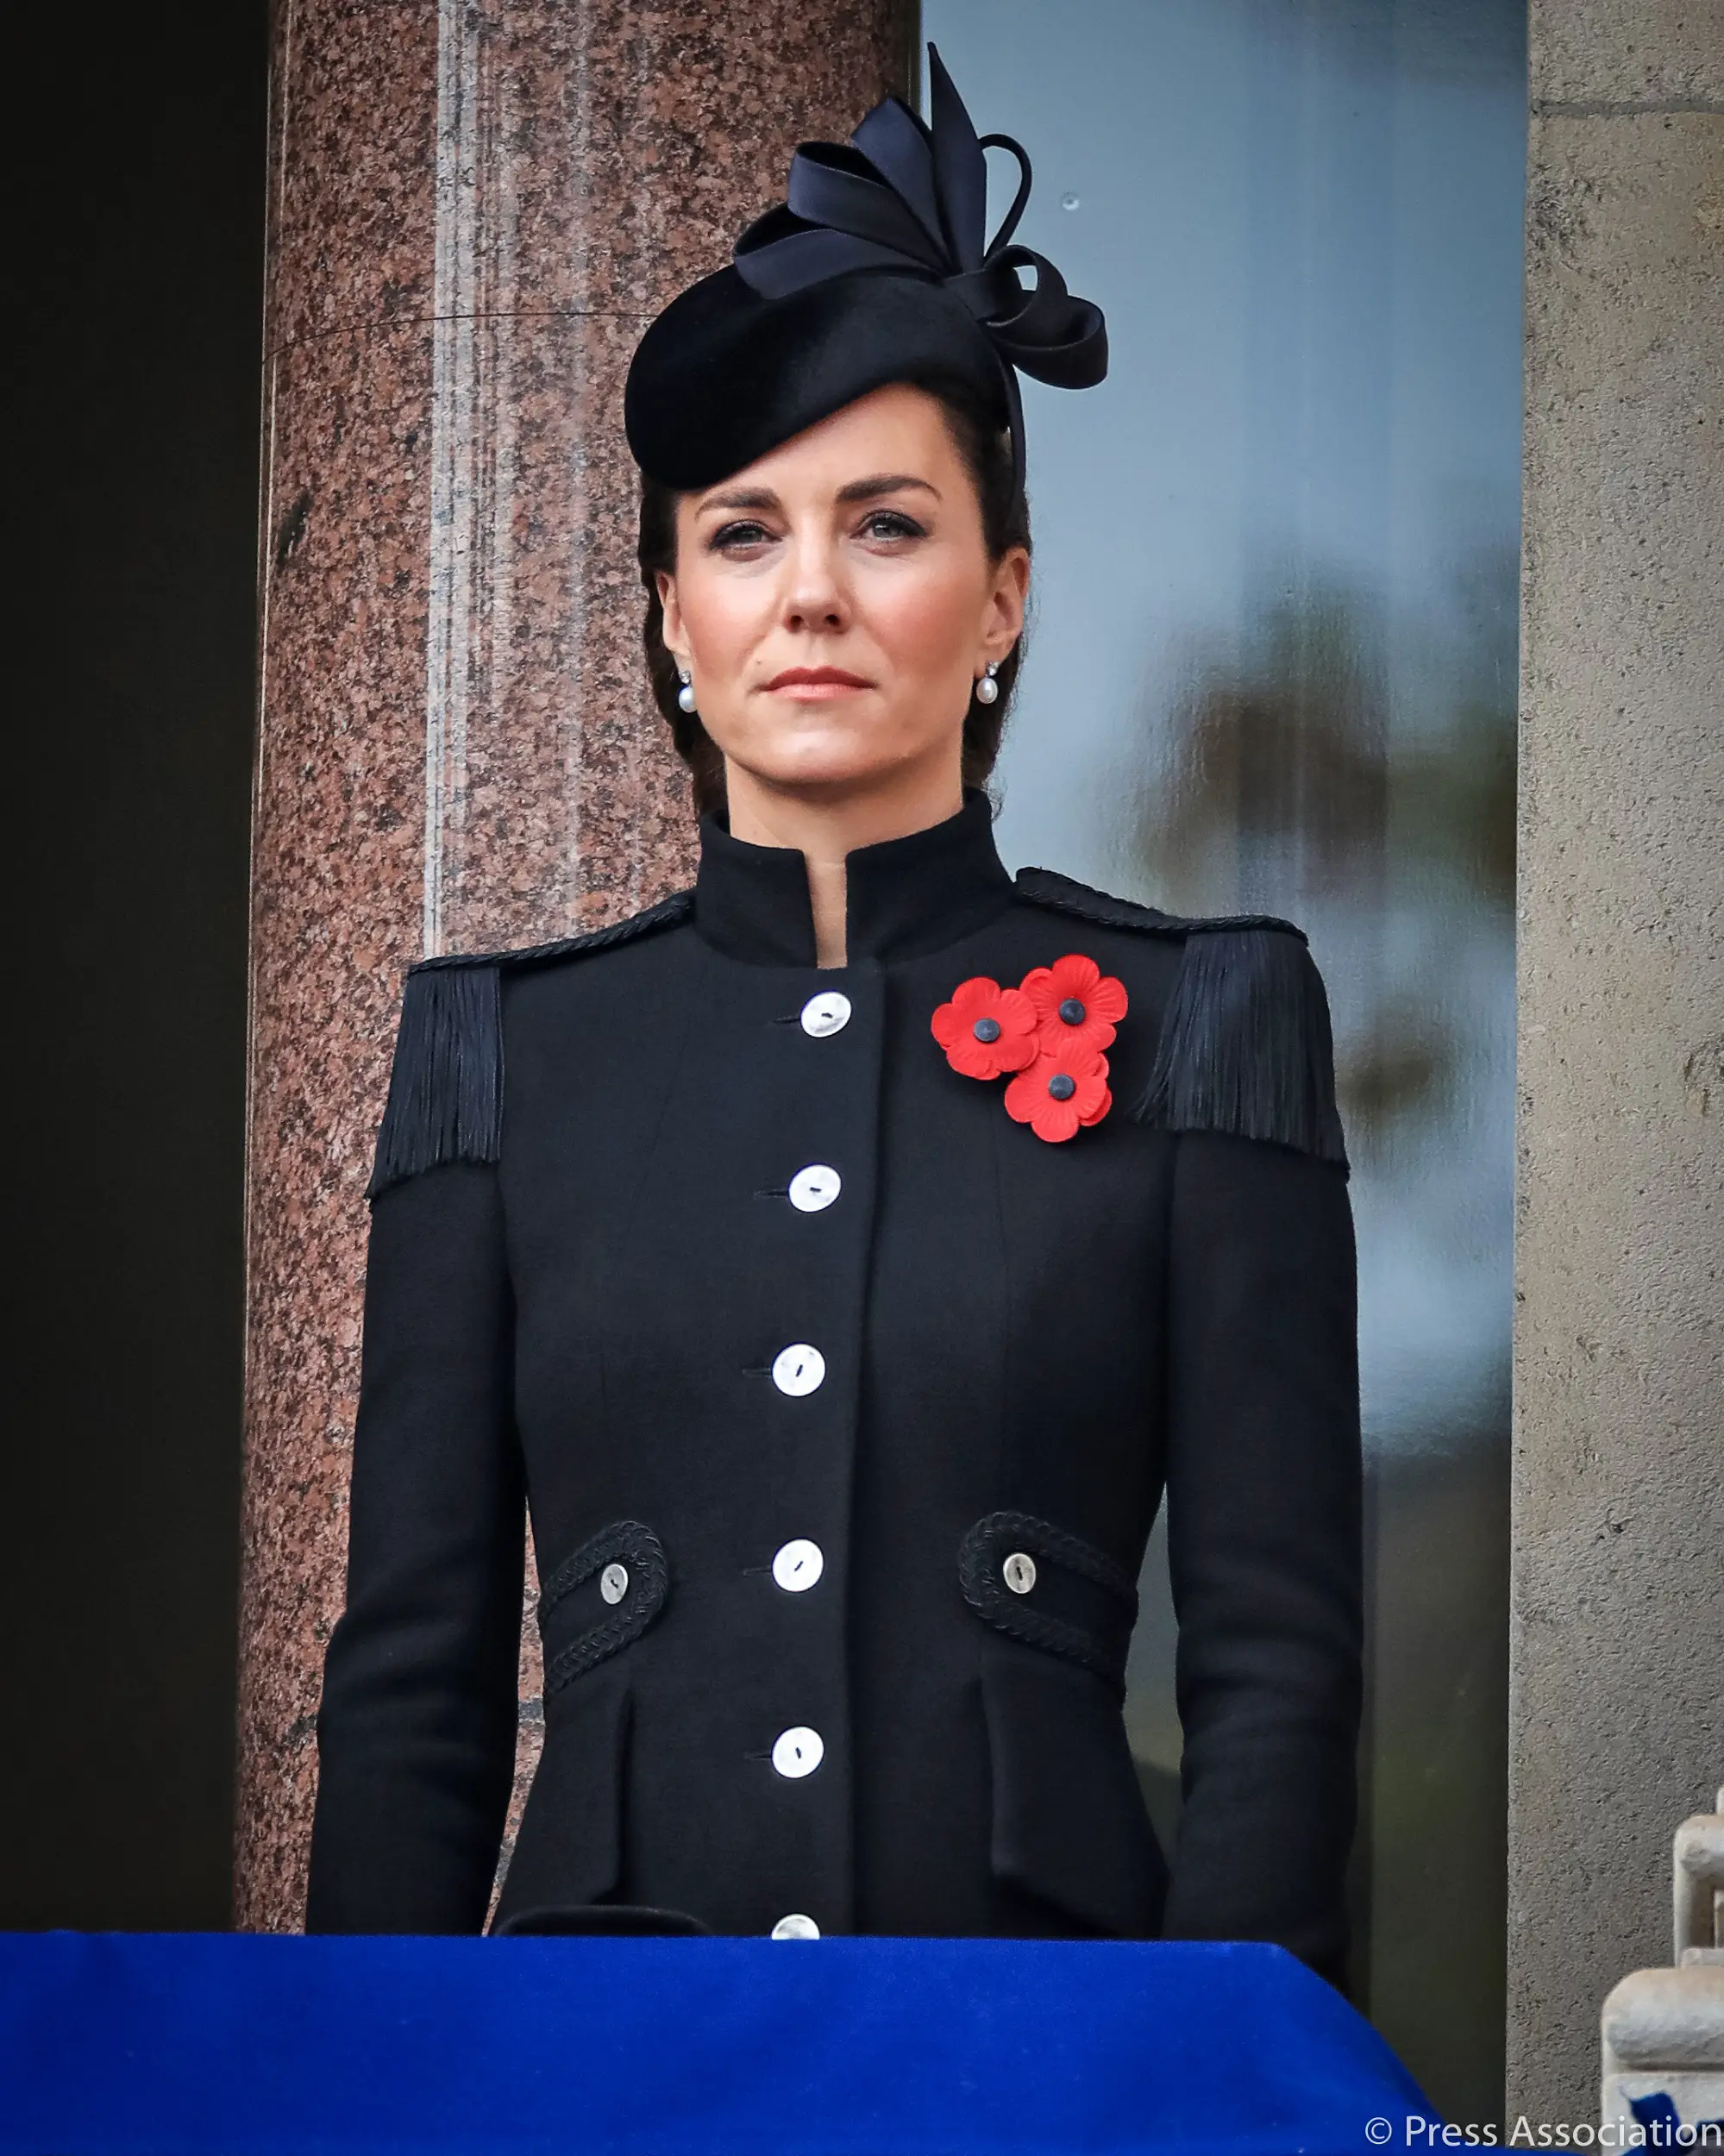 The Duchess of Cambridge wore black Catherine Walker Coat and Philip Treacy Hat at 2020 Remembrance Day Service